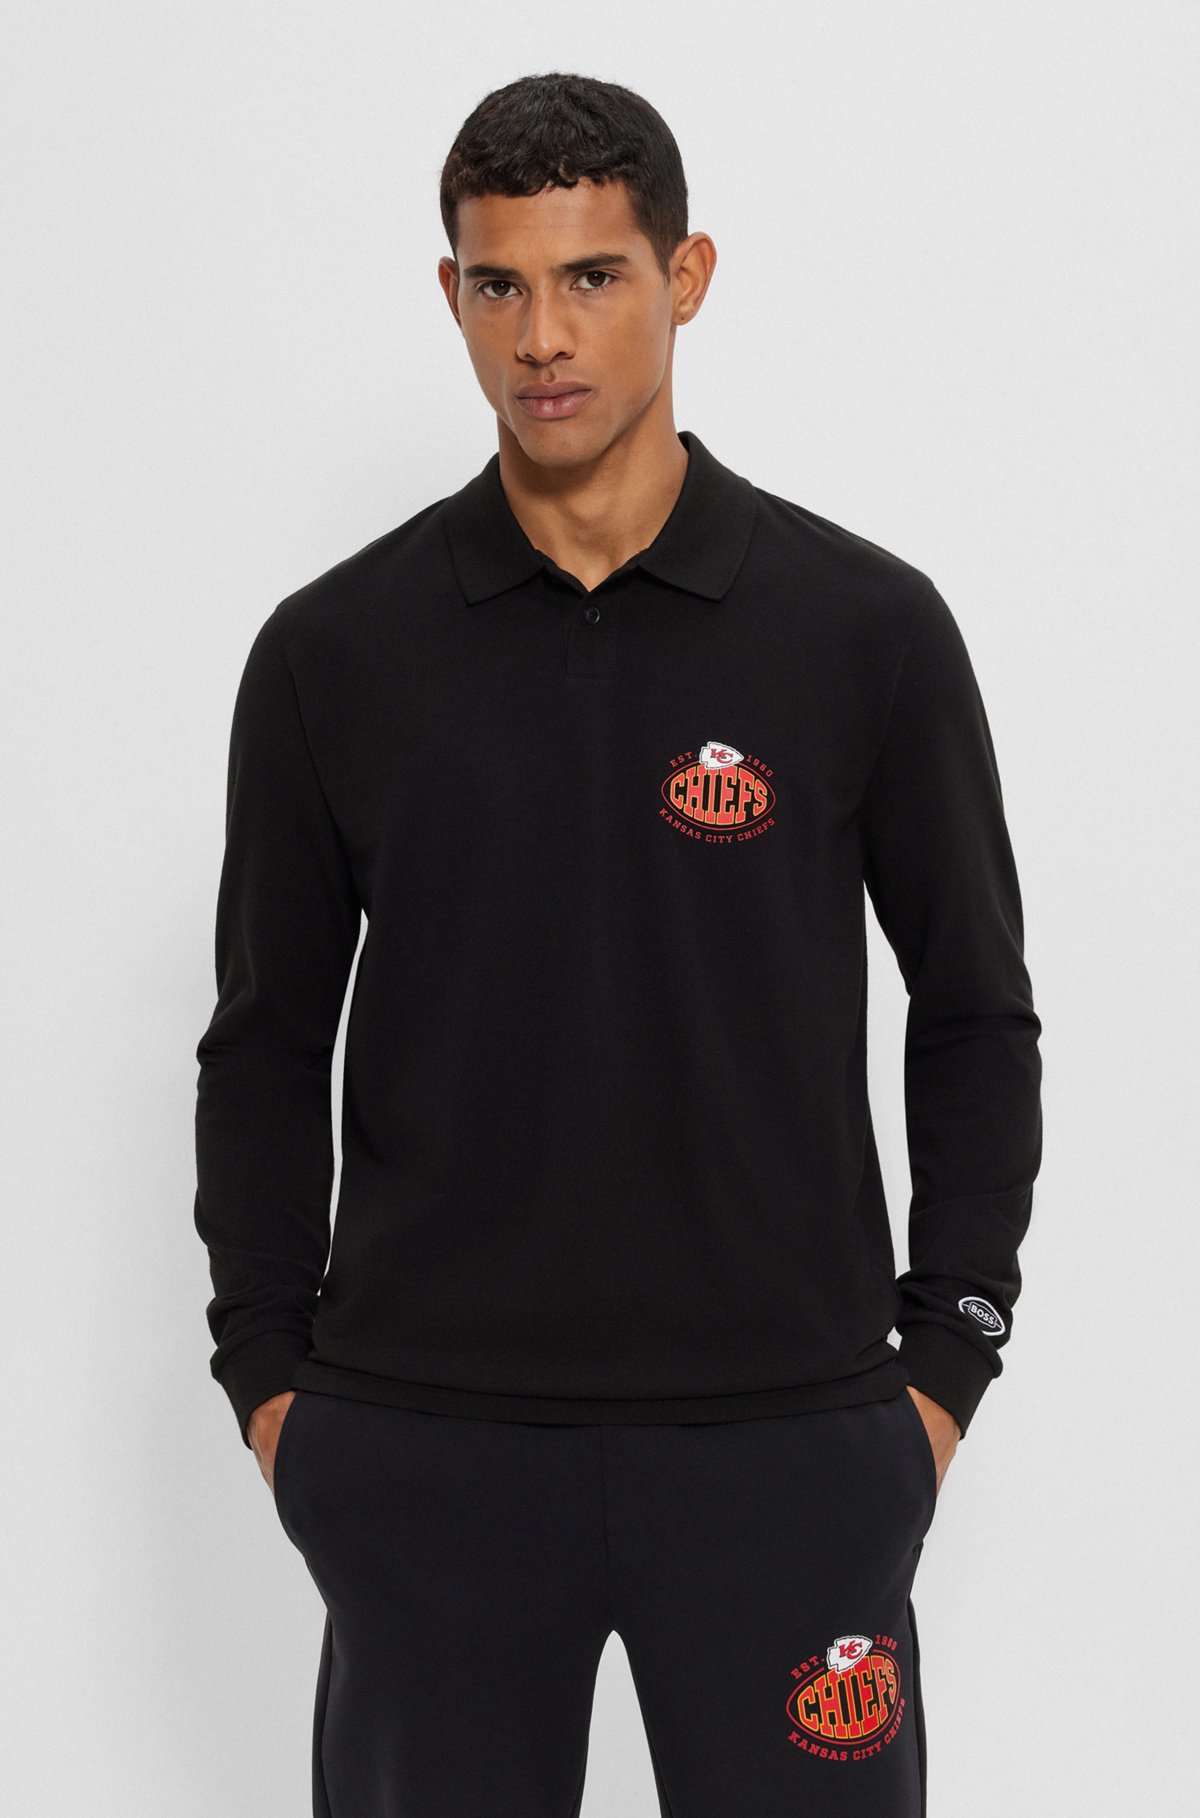 BOSS x NFL long-sleeved polo shirt with collaborative branding, Chiefs